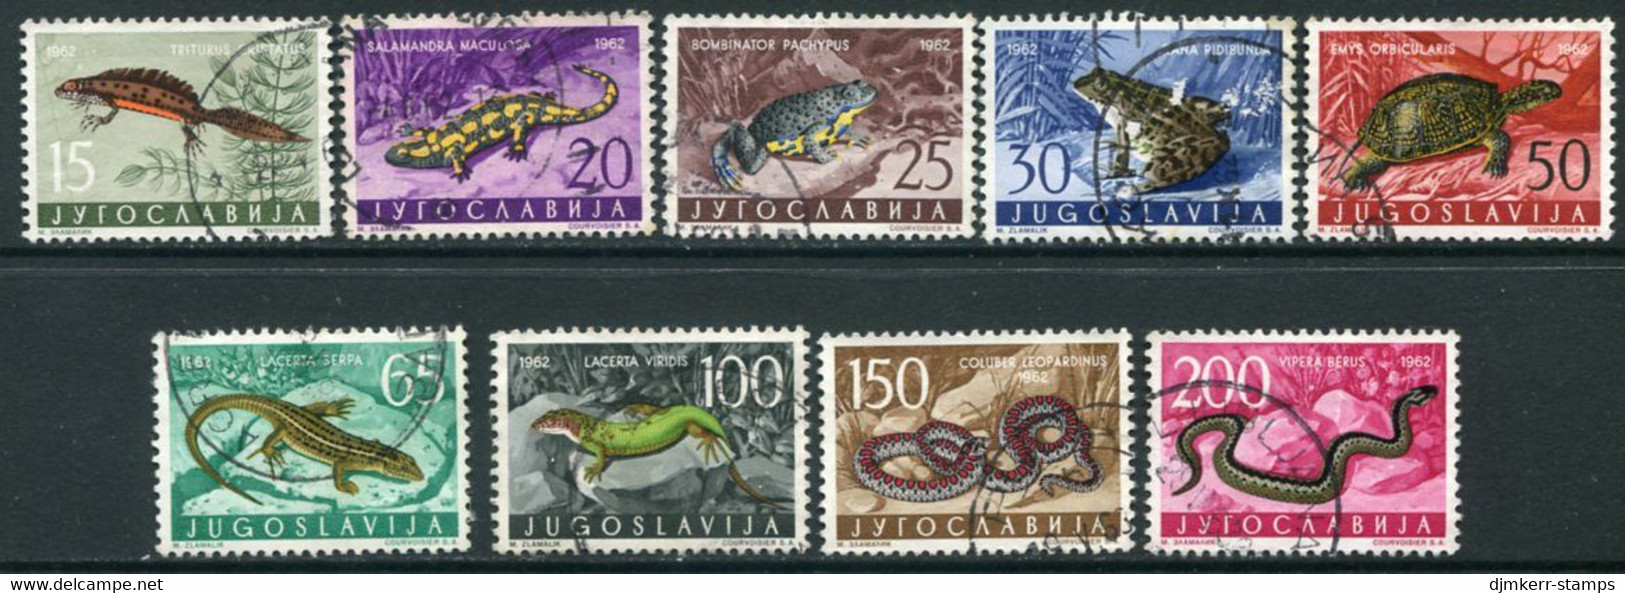 YUGOSLAVIA 1962 Amphibians And Reptiles  Used.  Michel 1007-15 - Used Stamps